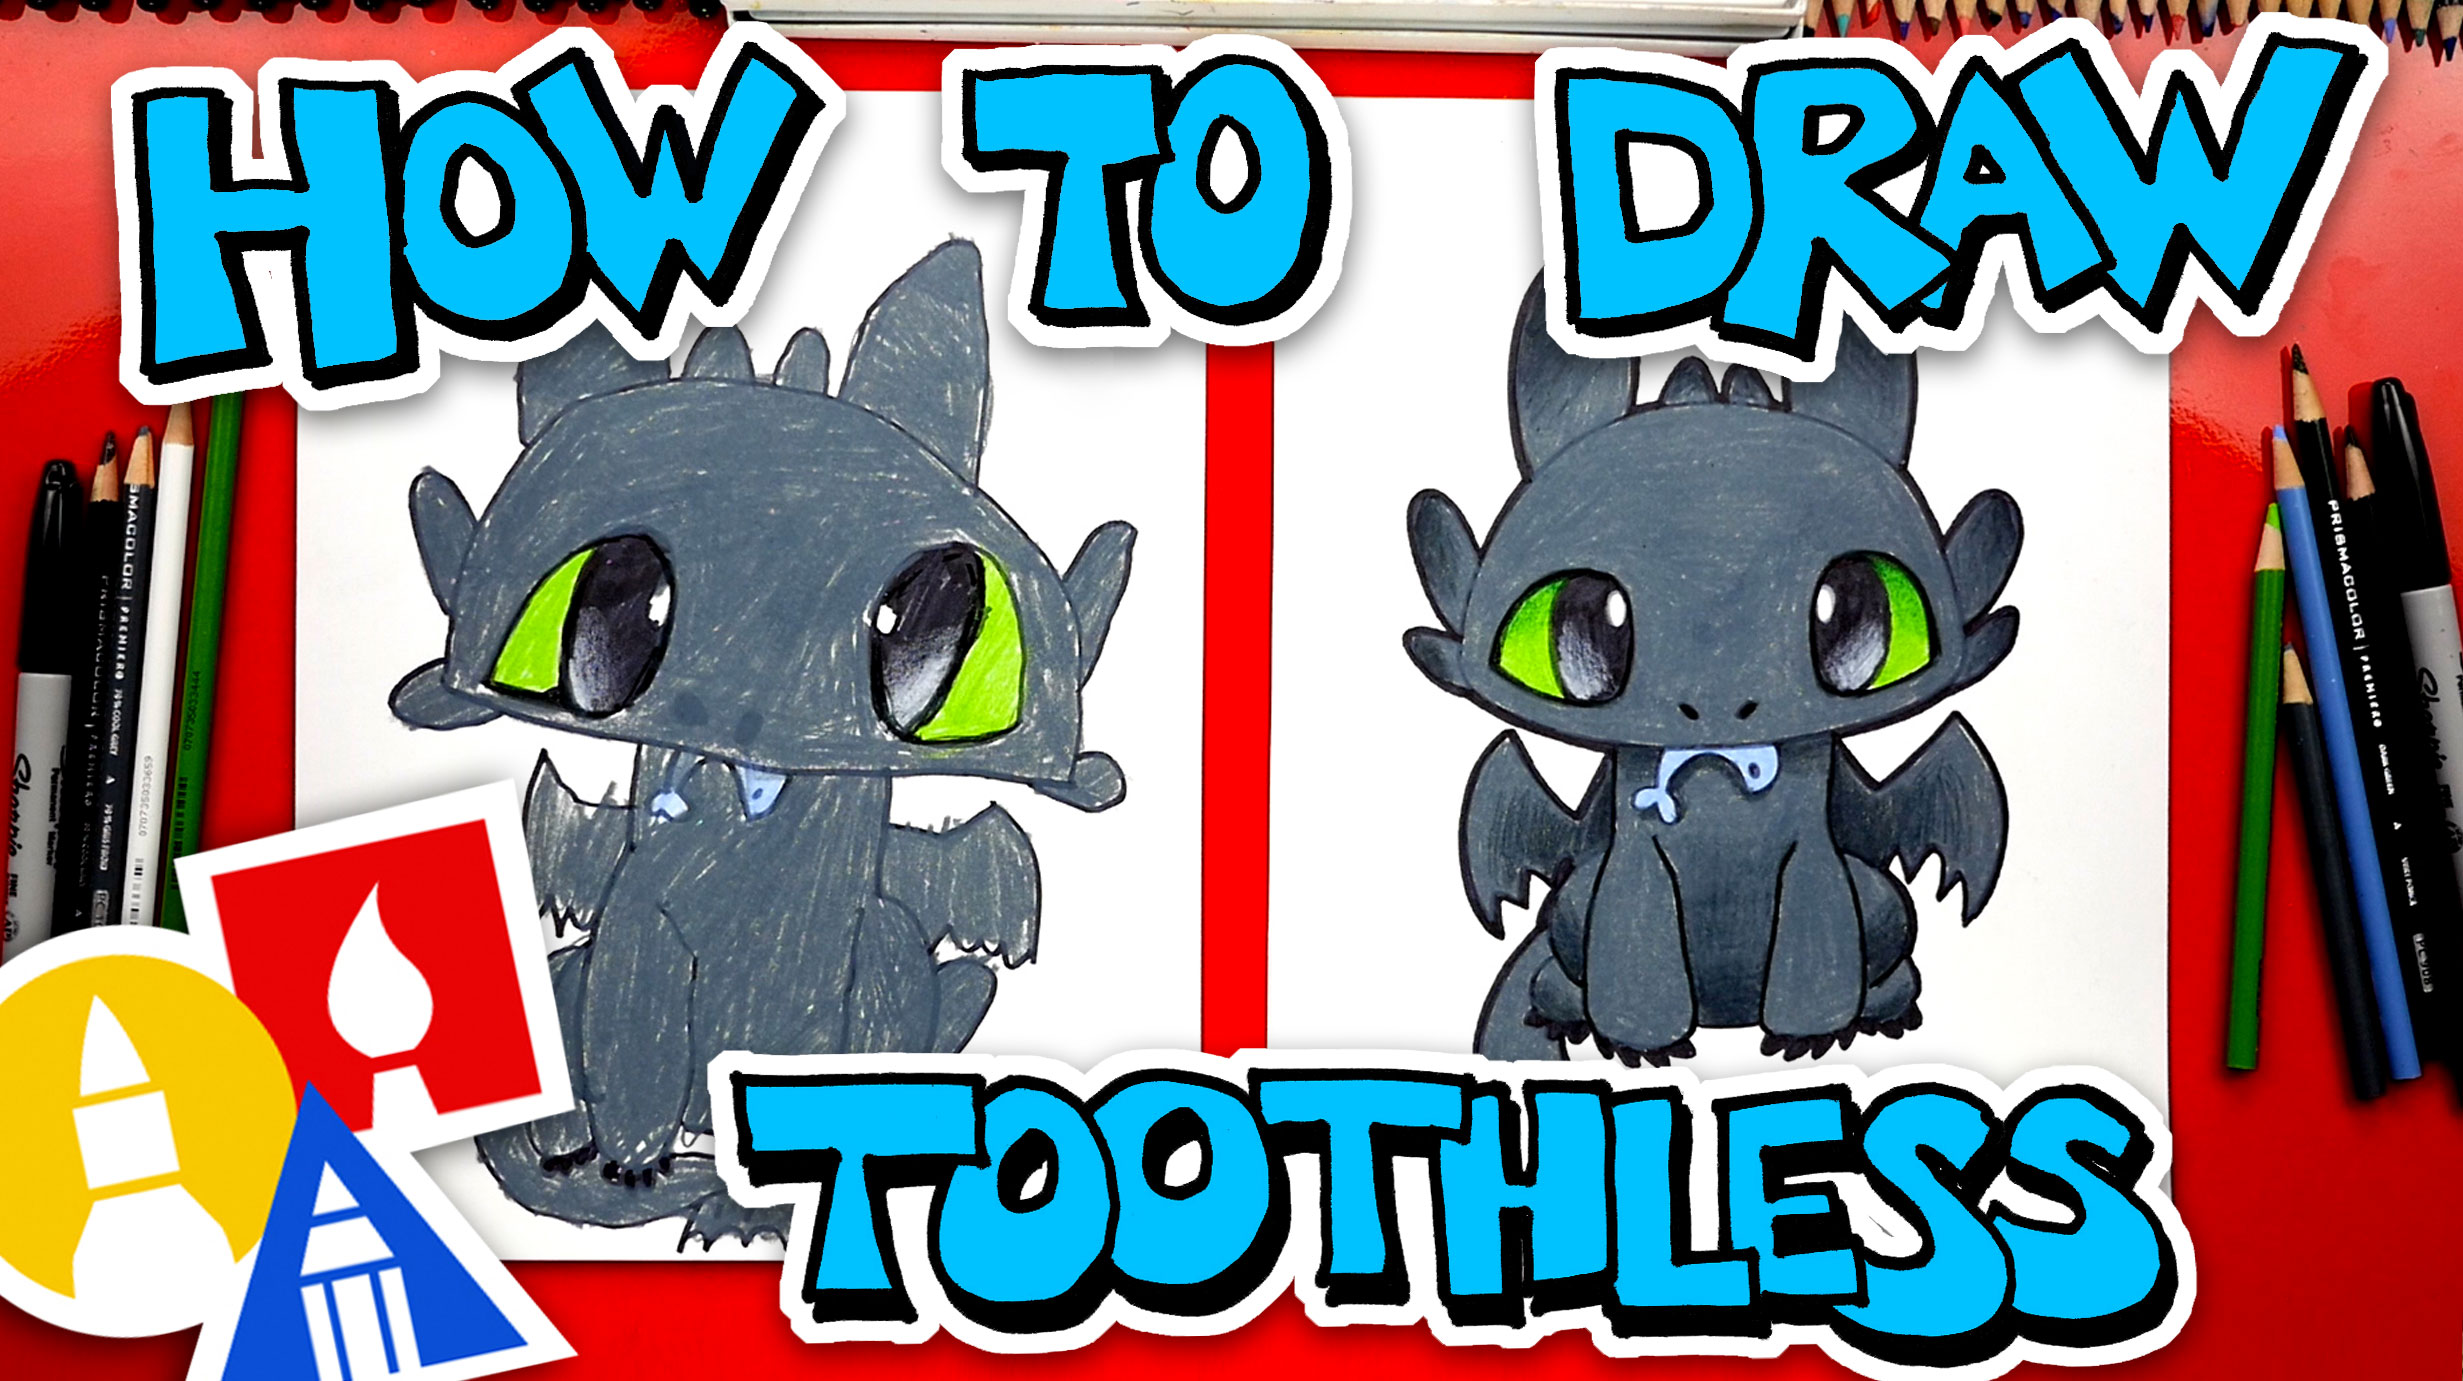 How To Draw Toothless, How To Train Your Dragon, Step by Step, Drawing  Guide, by Nickmoble - DragoArt